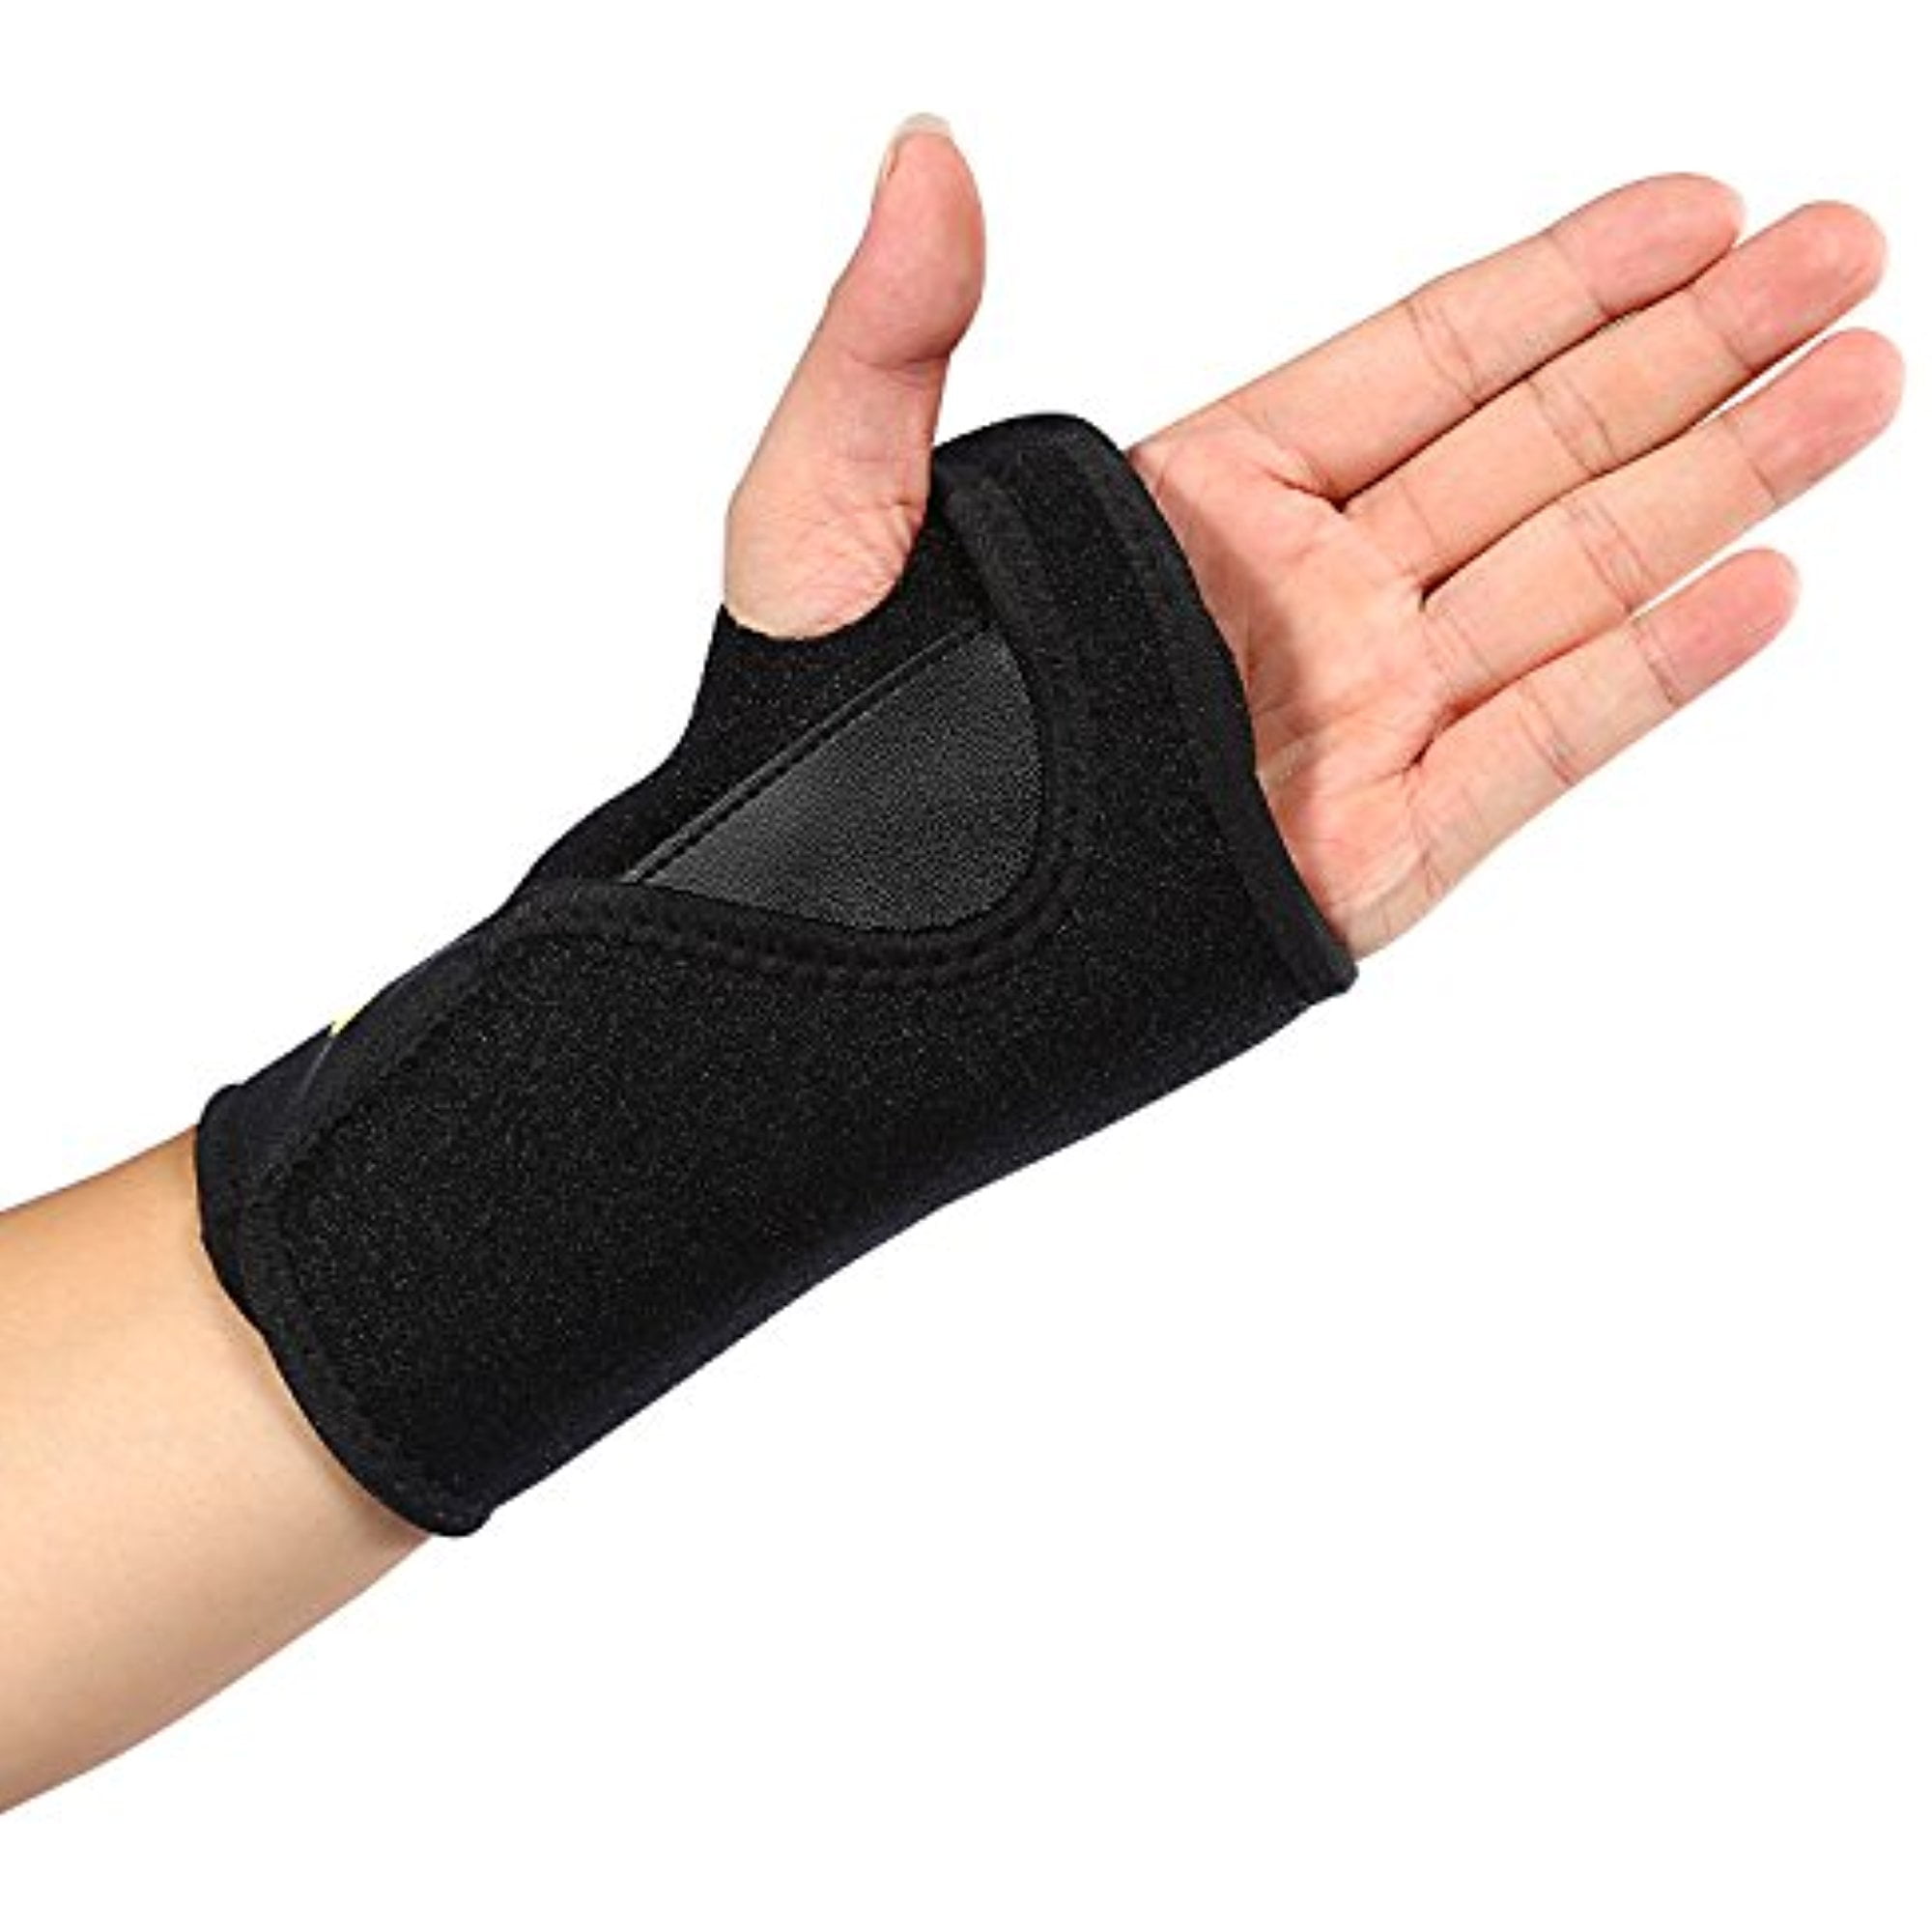 CARPAL TUNNEL SPLINTED WRIST SUPPORT THERAPY BRACE WITH HOT/COLD THERMA-GEL 